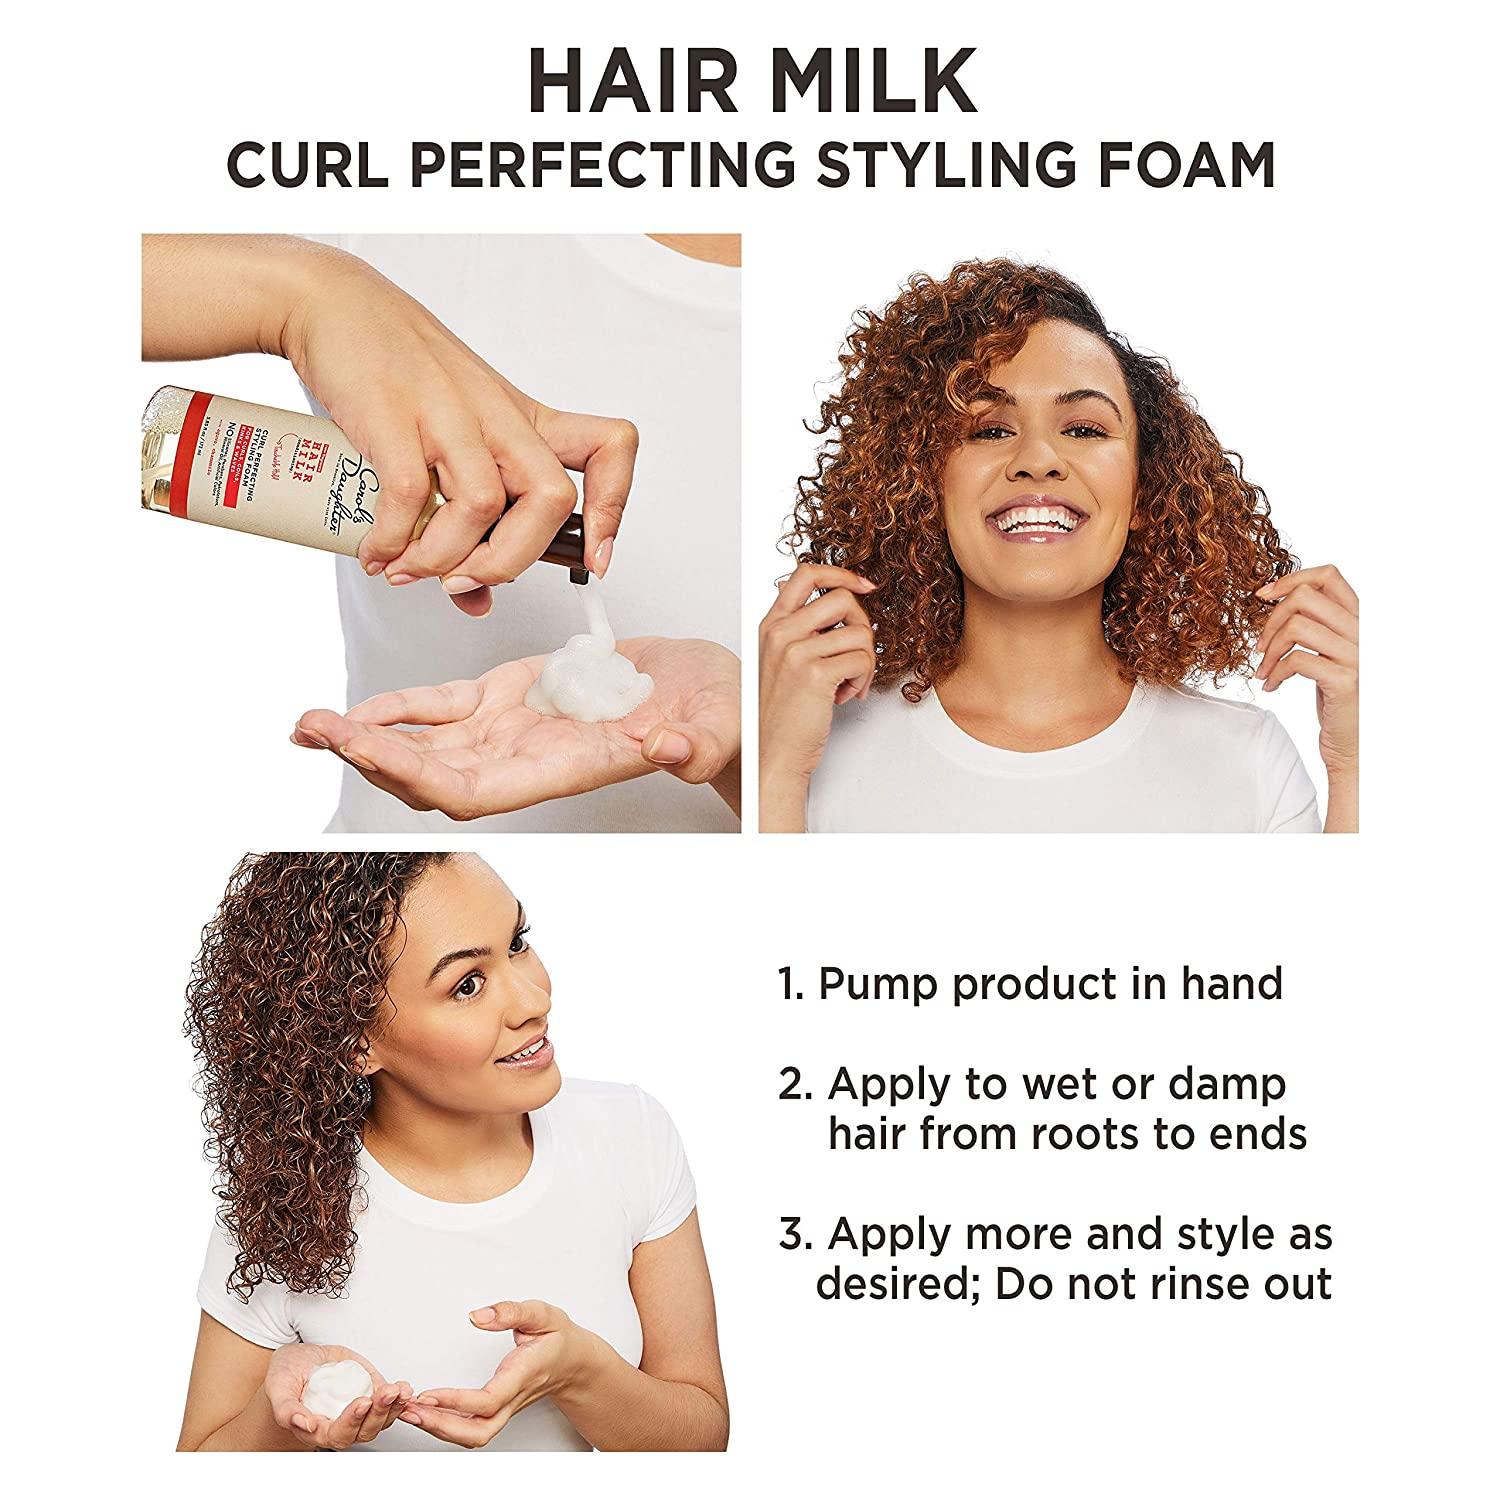 Curly Hair Products by Carol's Daughter, Hair Milk Styling Foam For Curls,  Coils and Waves, with Honey, Rosemary and Macadamia Oil,  Fl Oz (Design  and Packaging May Vary)